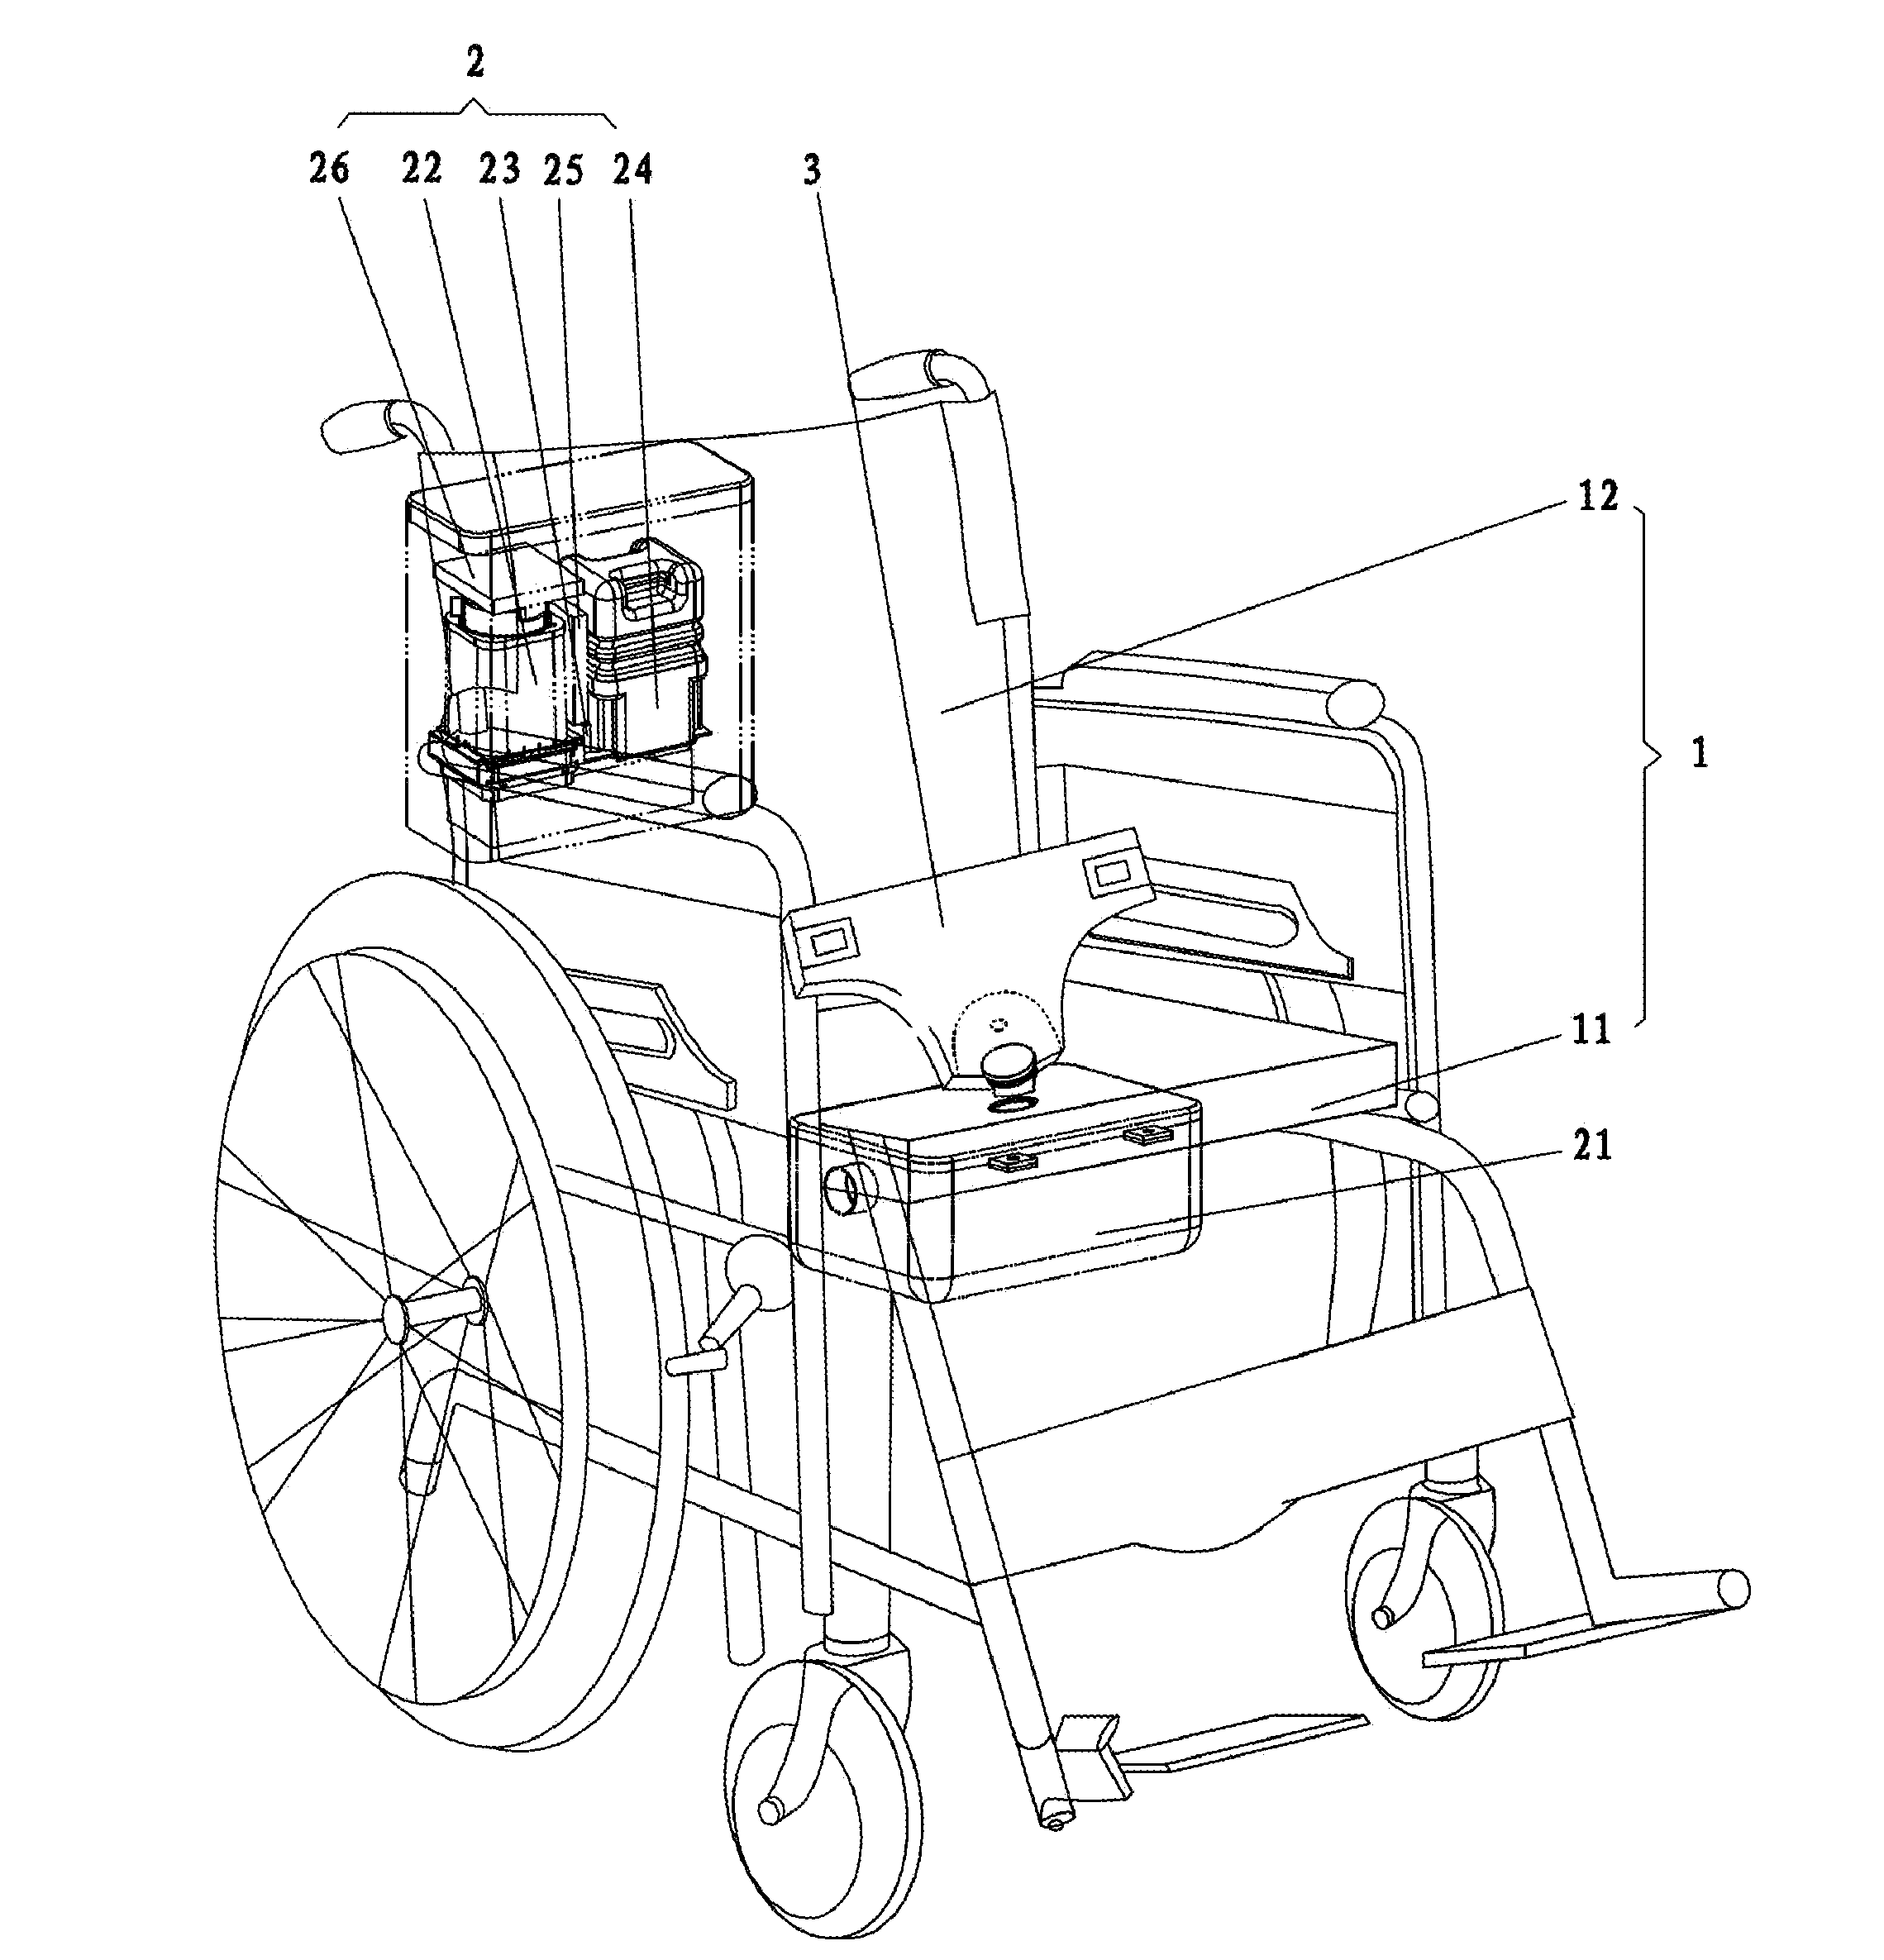 Automatic wheelchair-type feces cleaner without need of undressing and dressing